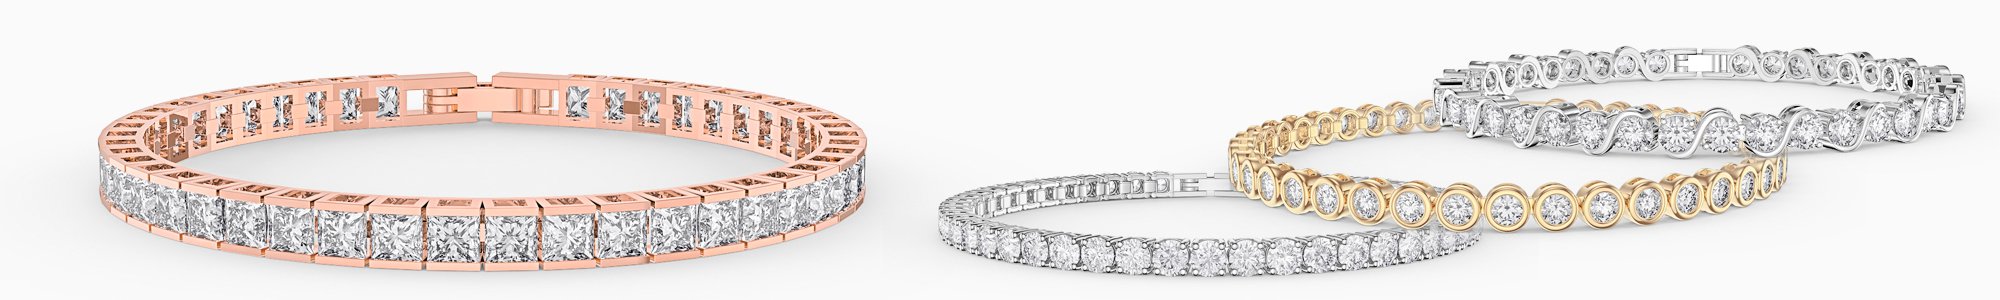 Bracelets for everyone - from precious gemstones to Diamonds. From Silver to 18ct Gold.